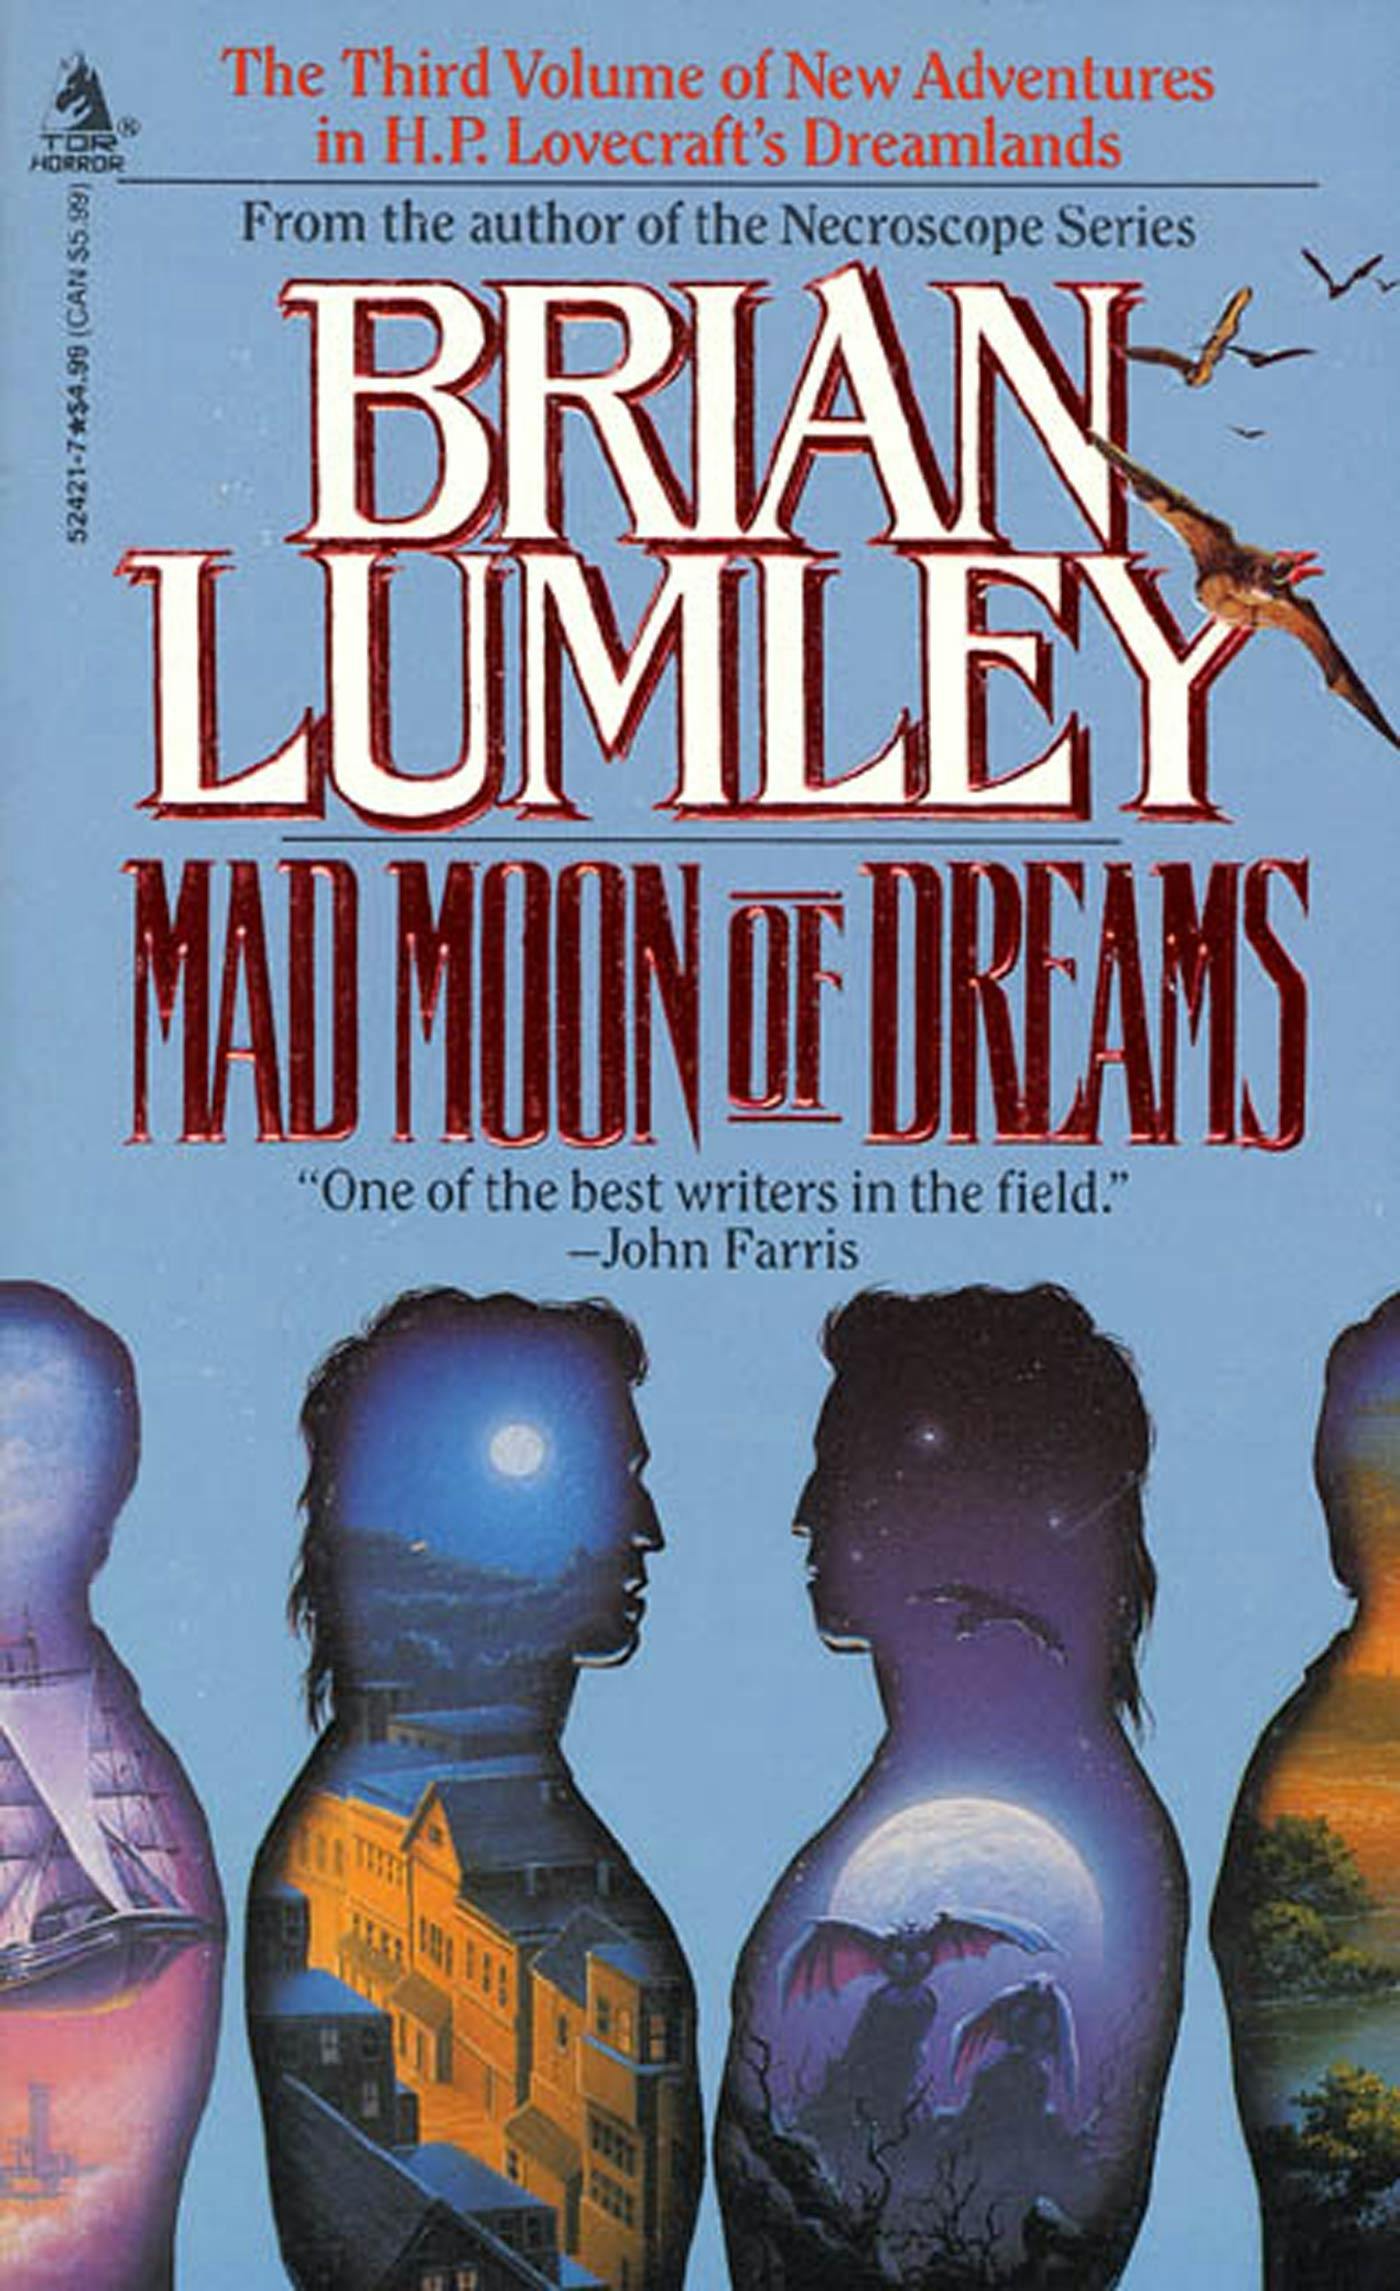 Cover for the book titled as: Mad Moon of Dreams